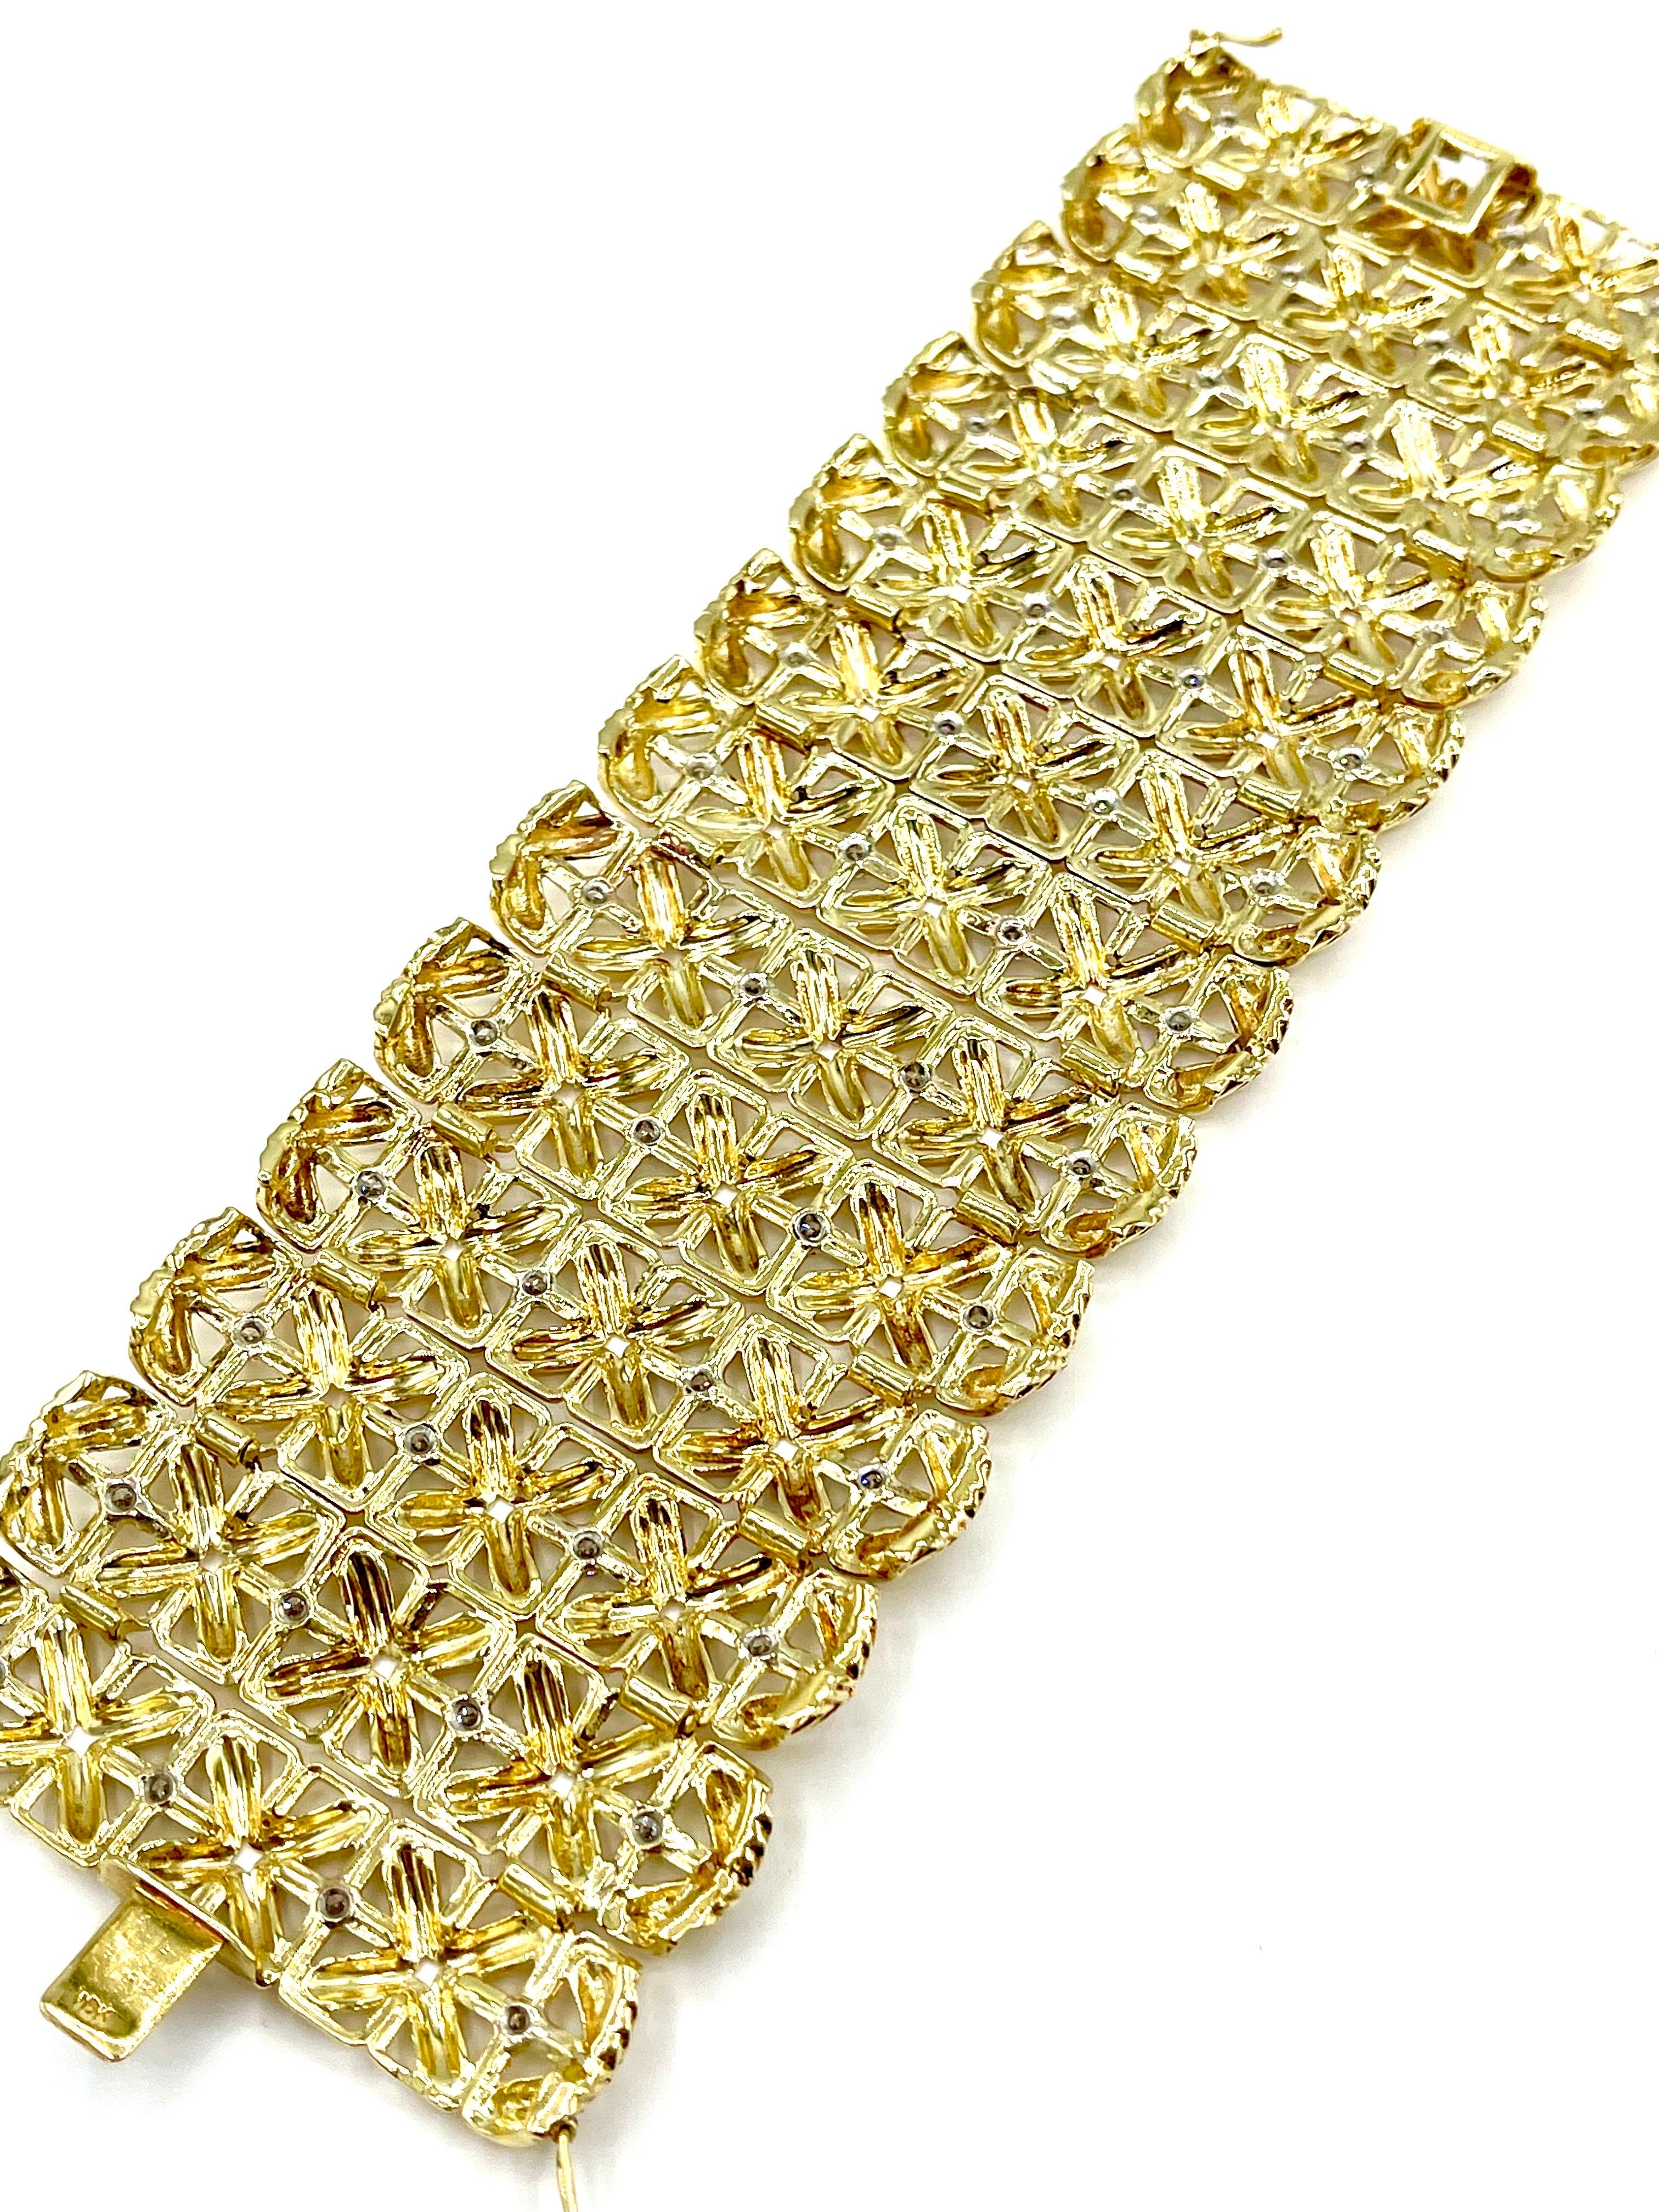 A one of a kind Cartier wide fit Diamond bracelet.  The bracelet is designed with 52 round brilliant Diamonds, prong set in 18k yellow gold, combining for a total weight of 3.92 carats.  The diamonds are graded as F color, VVS2-VS1 clarity.  The